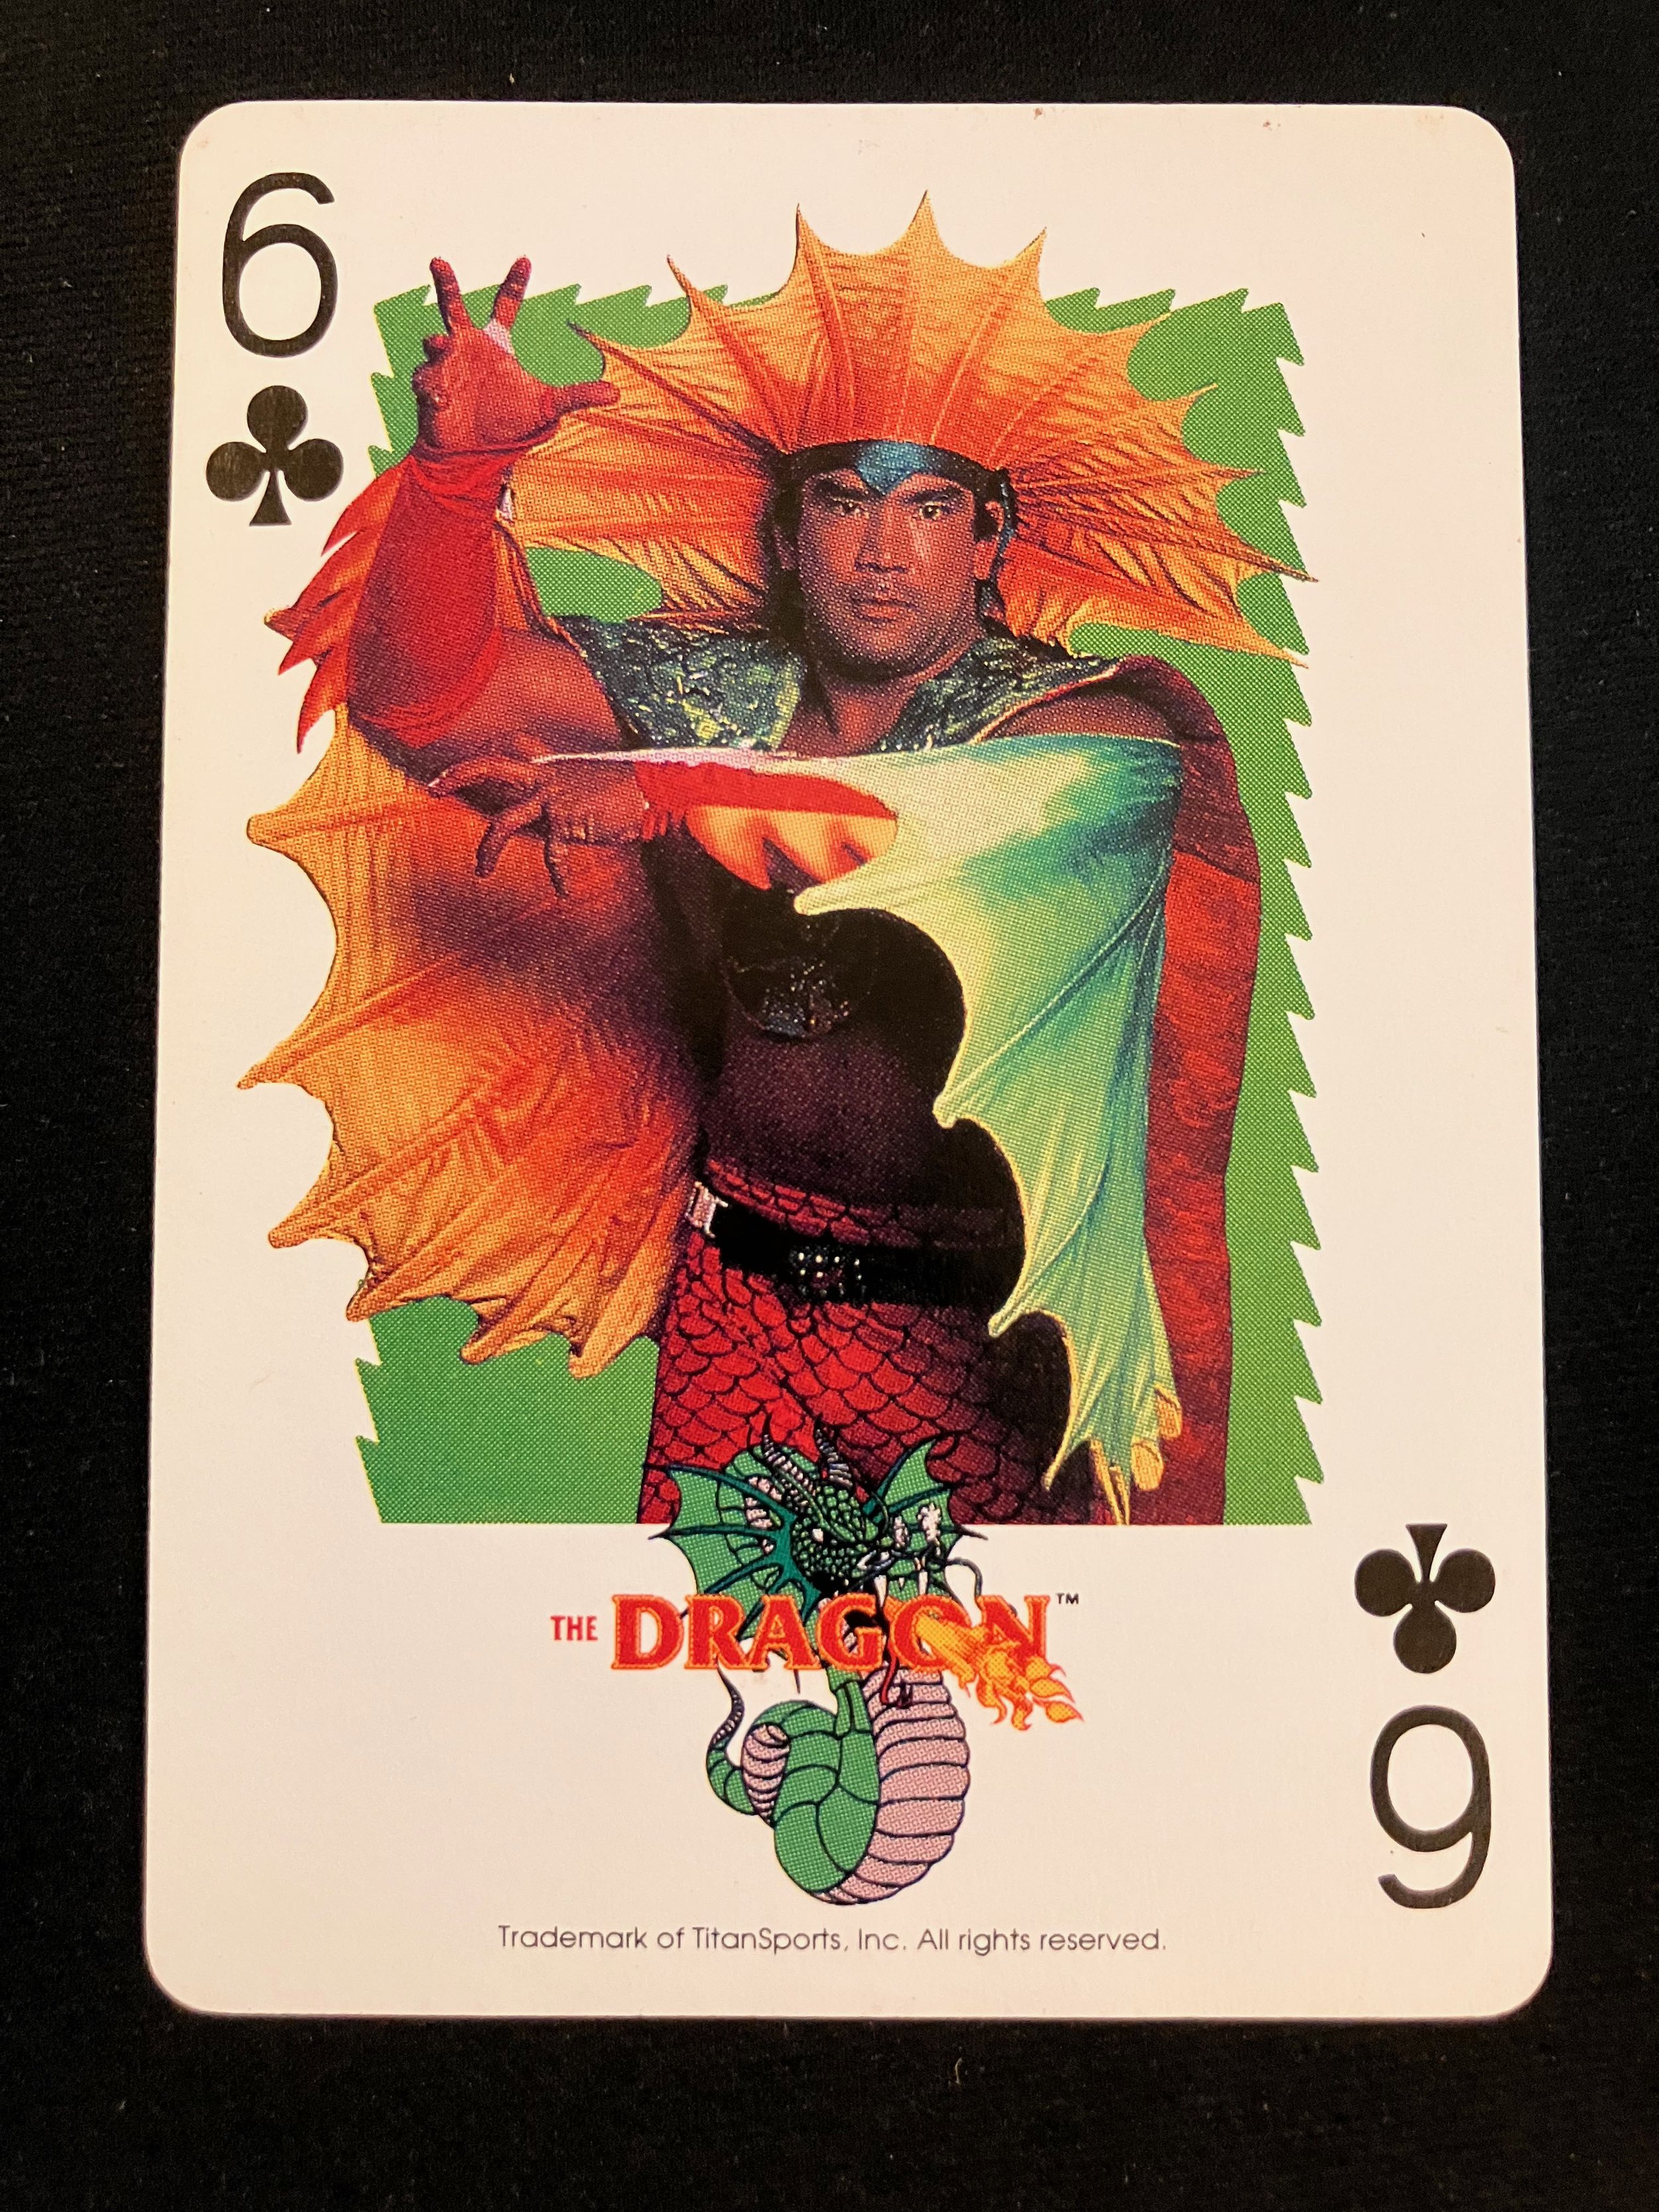 6 of Clubs - The Dragon